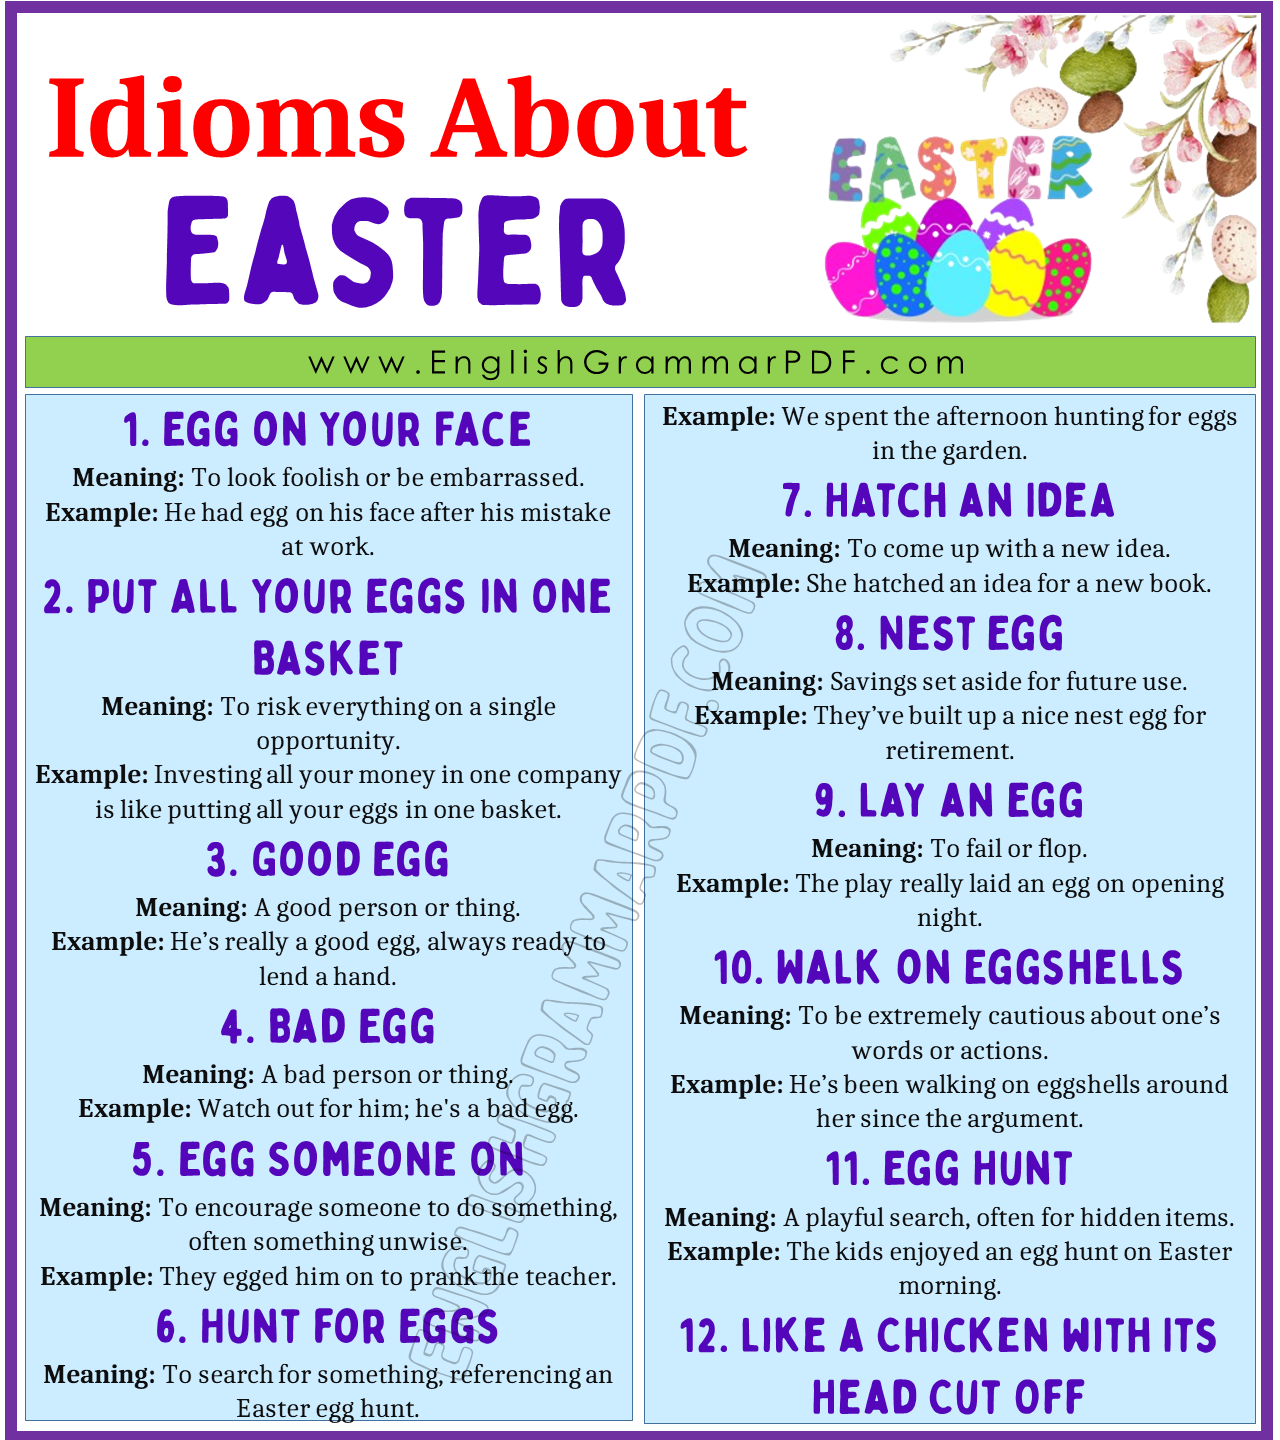 Idioms About Easter